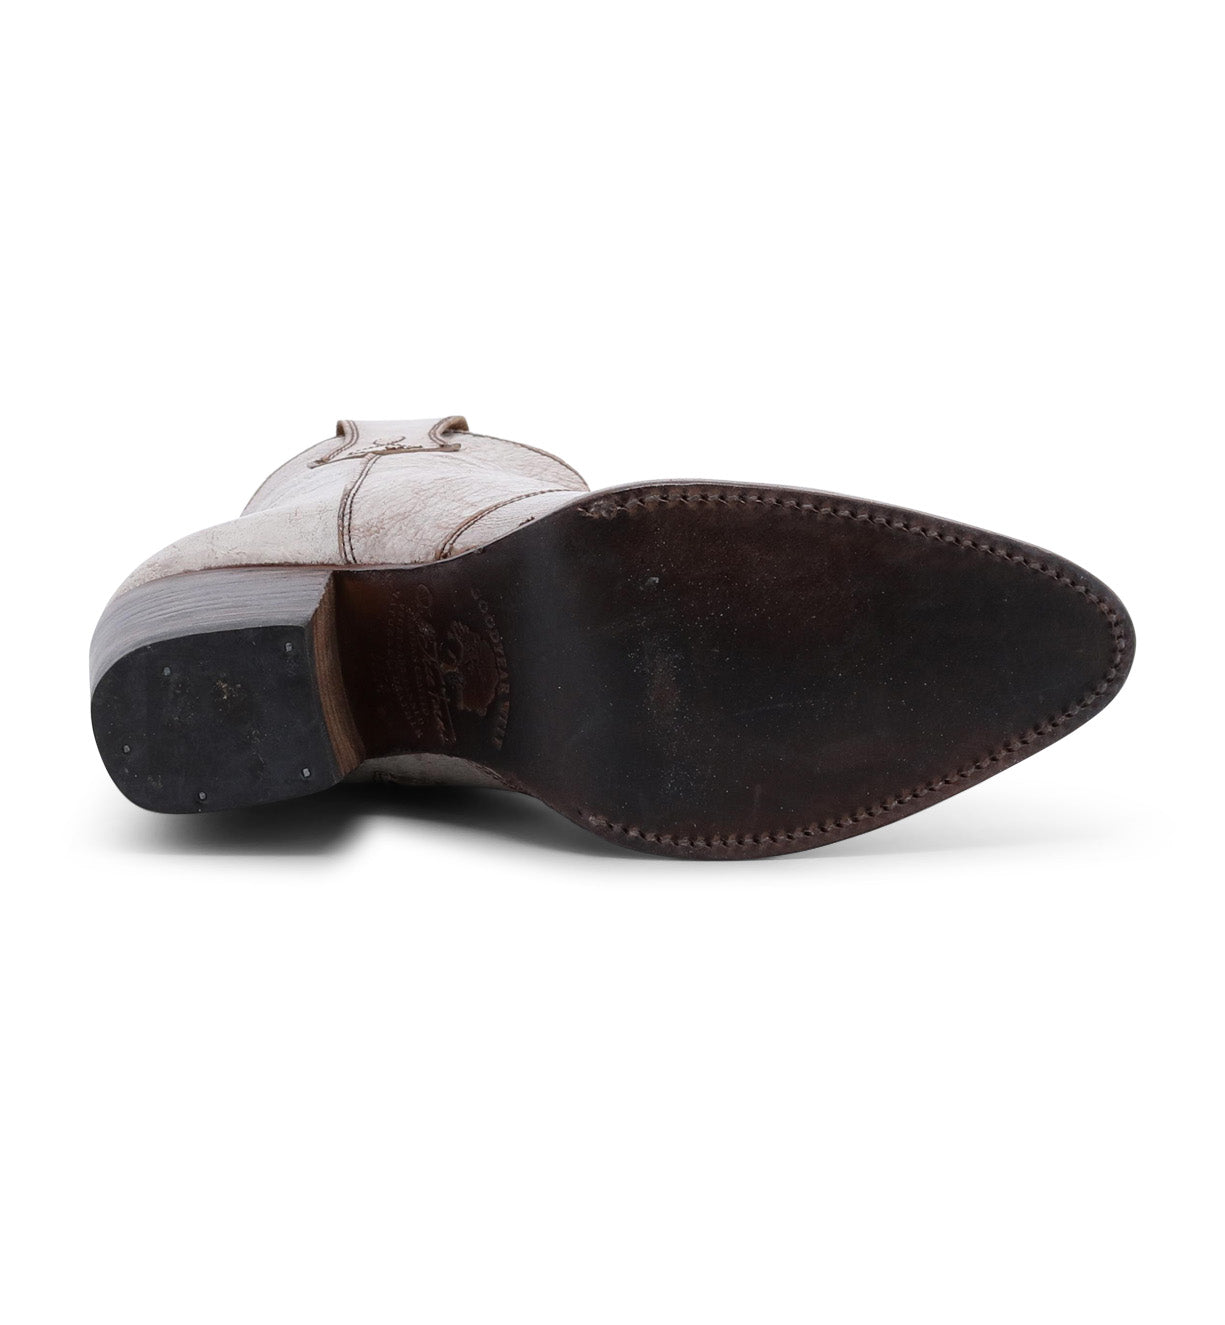 A pair of Oak Tree Farms Baila brown shoes with a black sole.